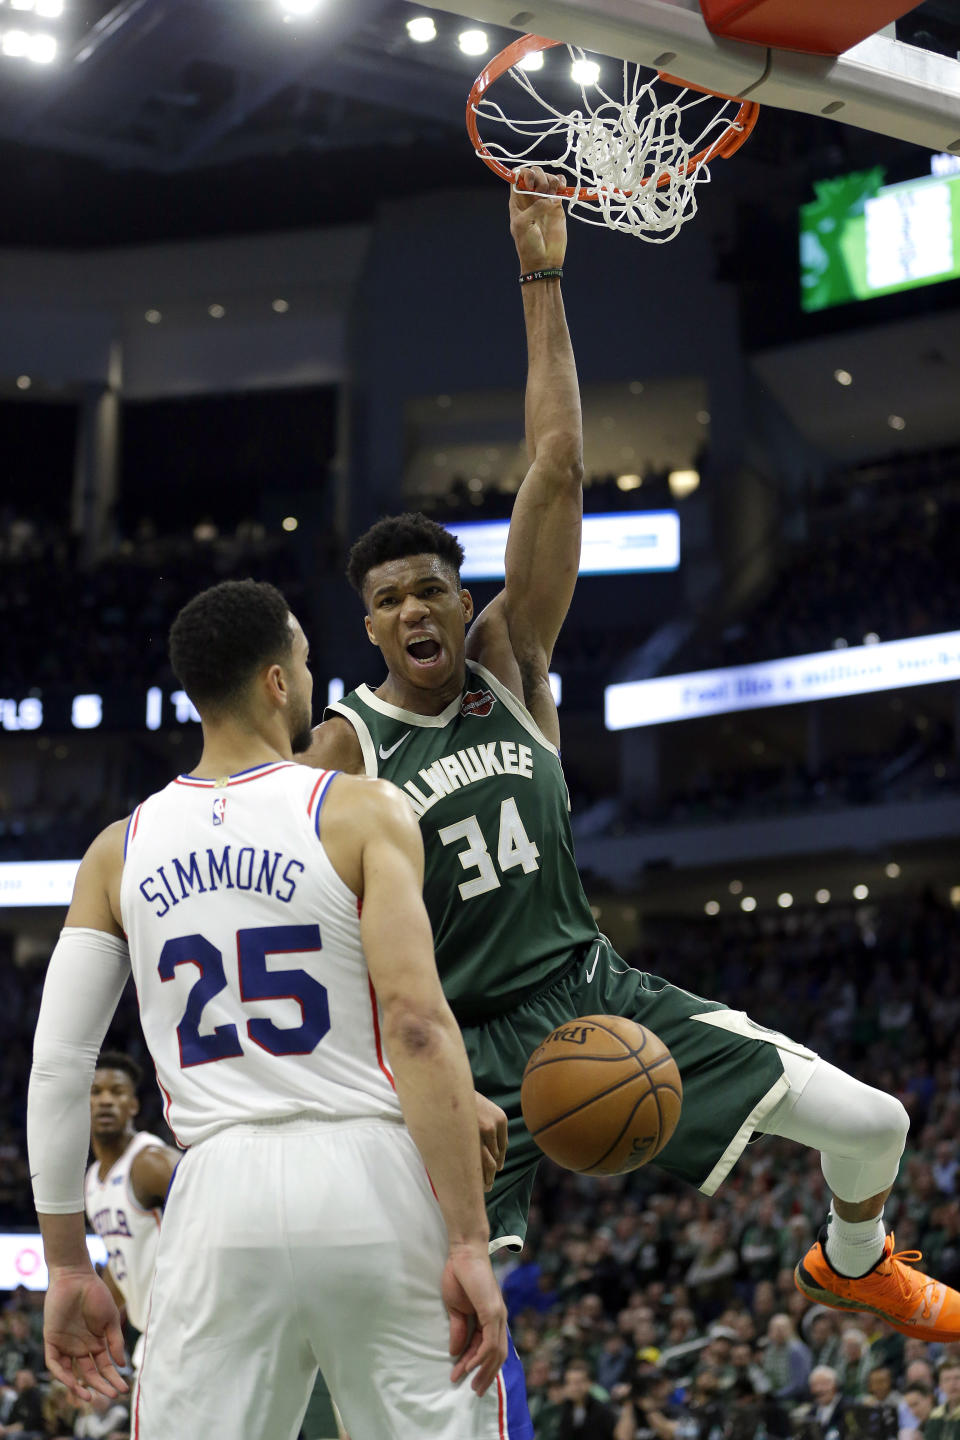 Milwaukee Bucks' Giannis Antetokounmpo (34) dunks after being fouled by Philadelphia 76ers' Ben Simmons (25) during the second half of an NBA basketball game Sunday, March 17, 2019, in Milwaukee. The 76ers won 130-125. (AP Photo/Aaron Gash)